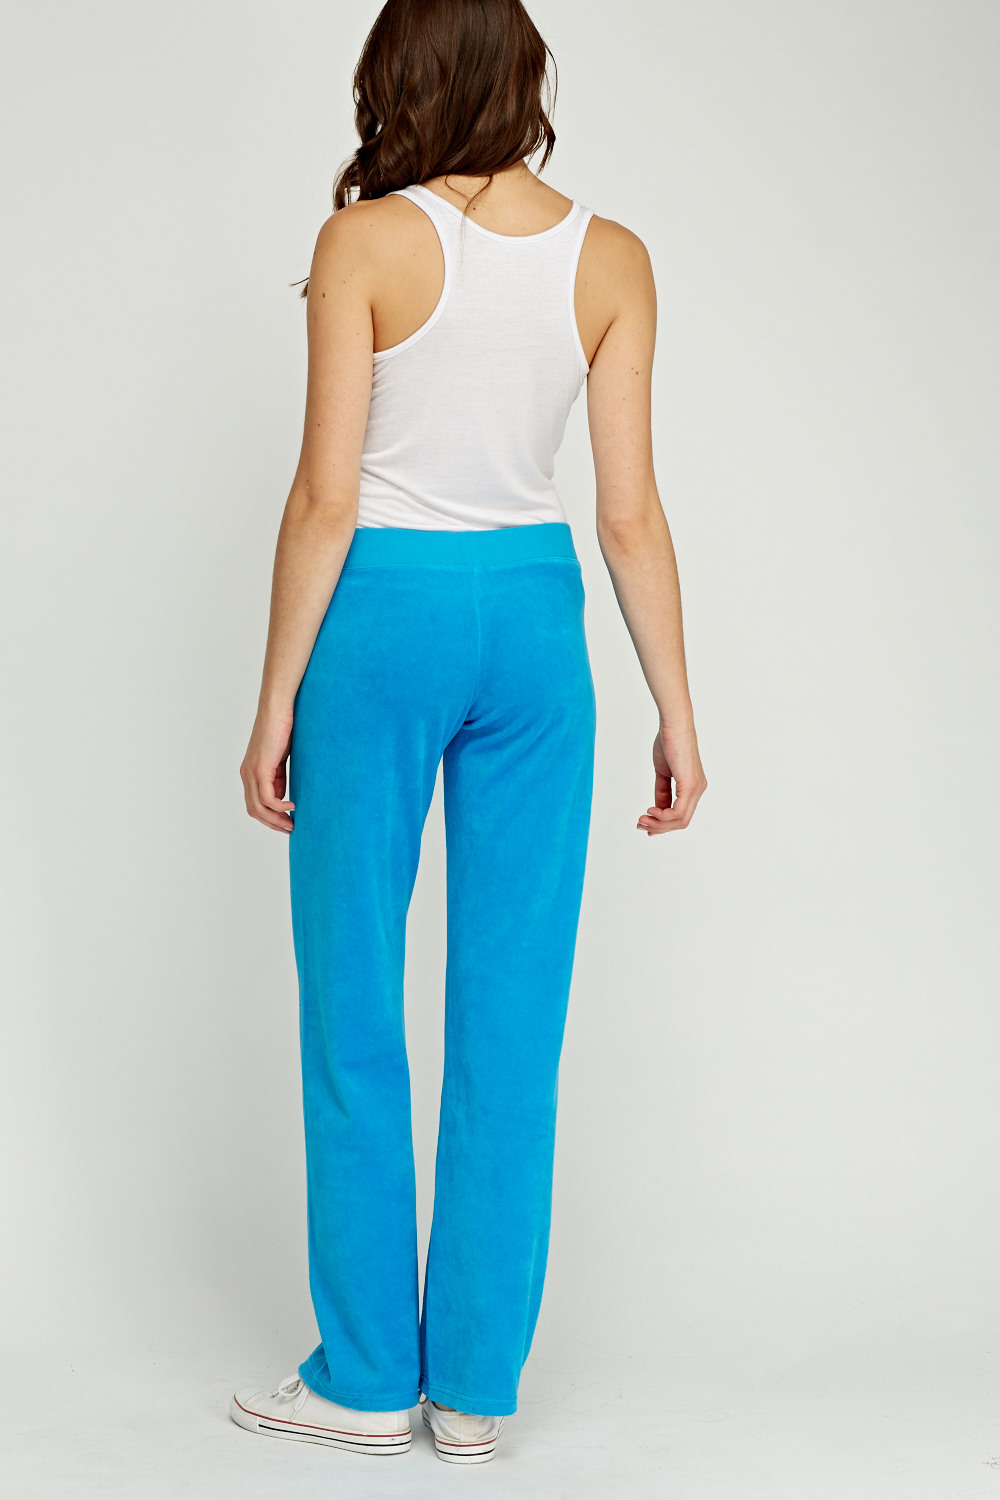 Juicy Couture Velveteen Blue Jogger Pants - Limited edition | Discount ...